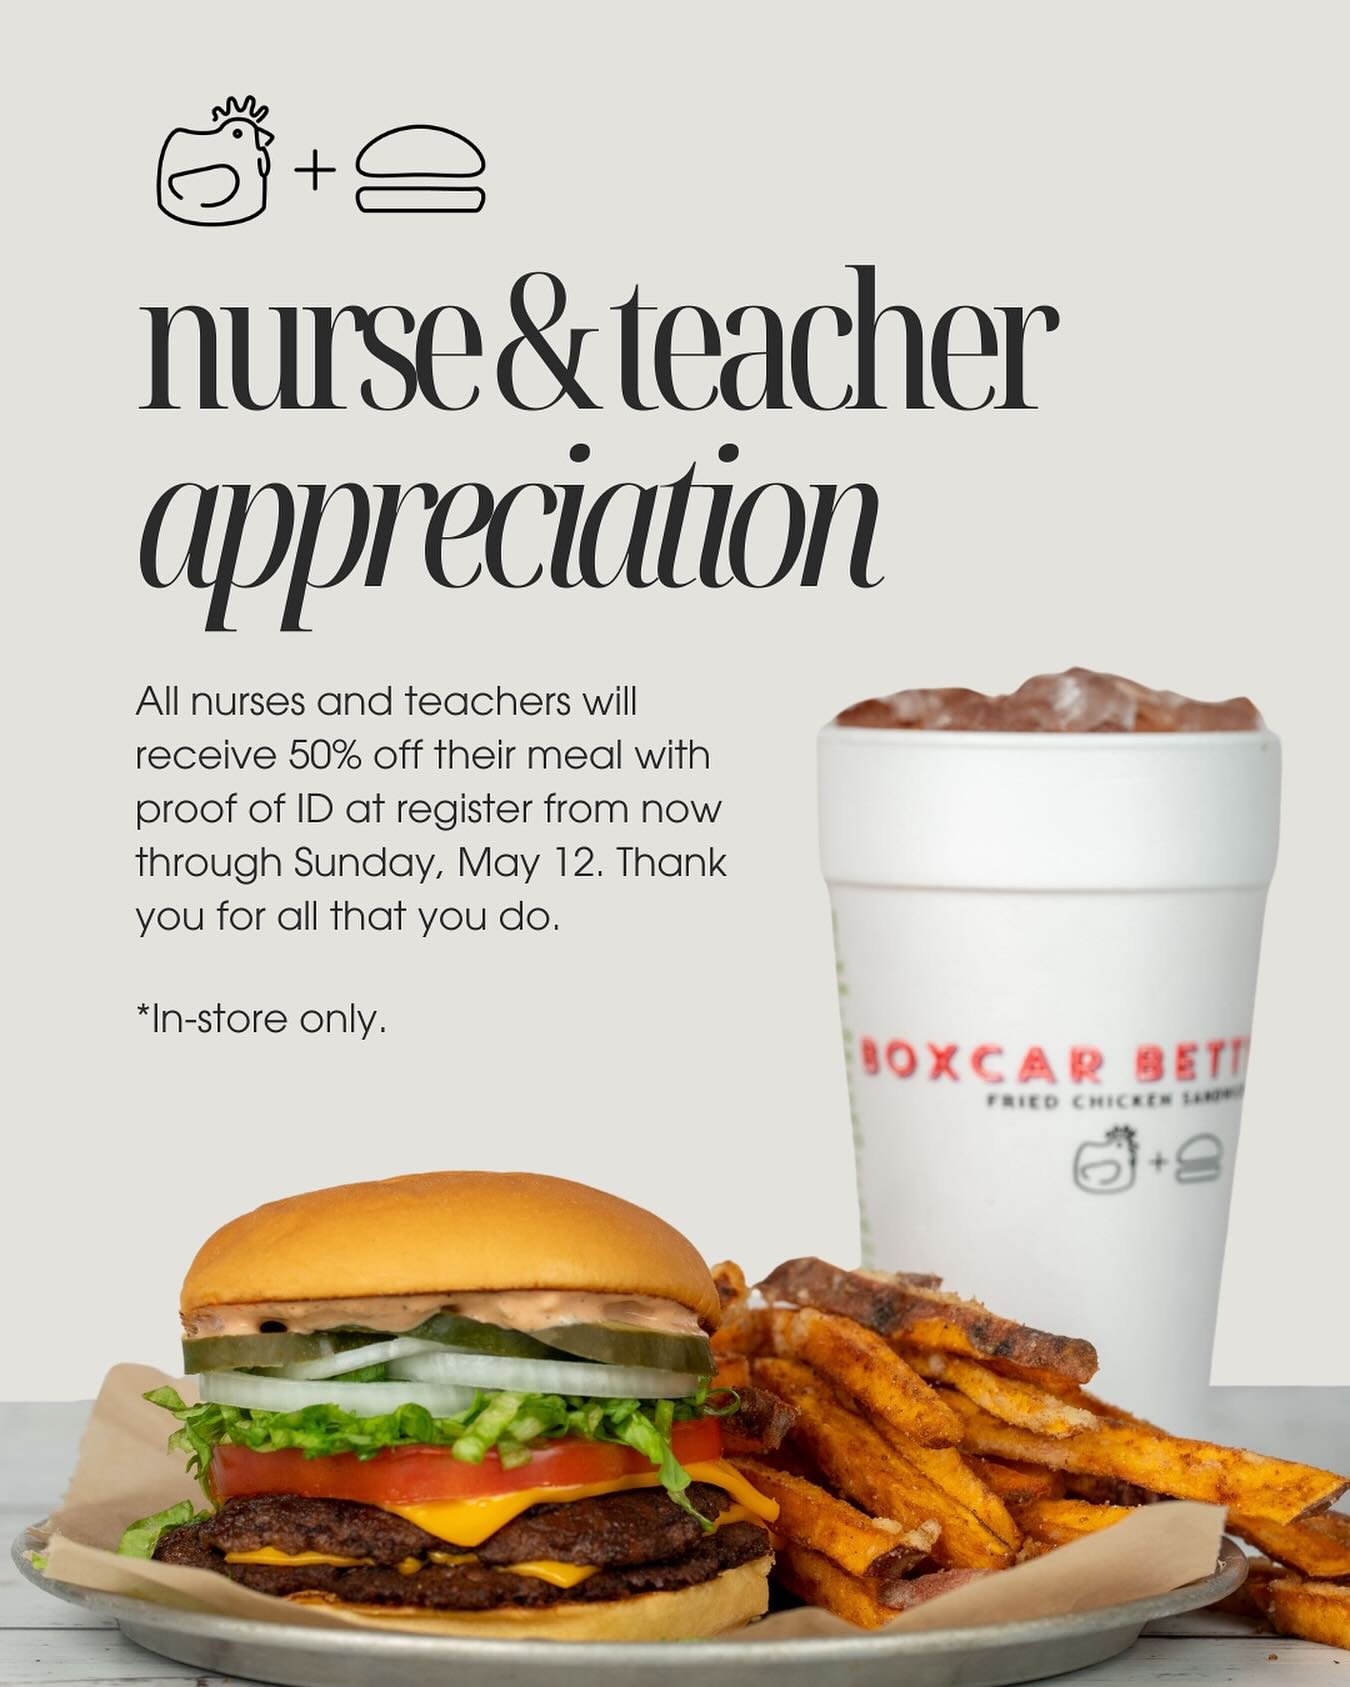 To show our appreciation, nurses and teachers can receive 50% off your meal now through Sunday, May 12 at the register with proof of ID. ❤️
In-store only. 
#boxcarbettys #nurseappreciationweek #teacherappreciationweek